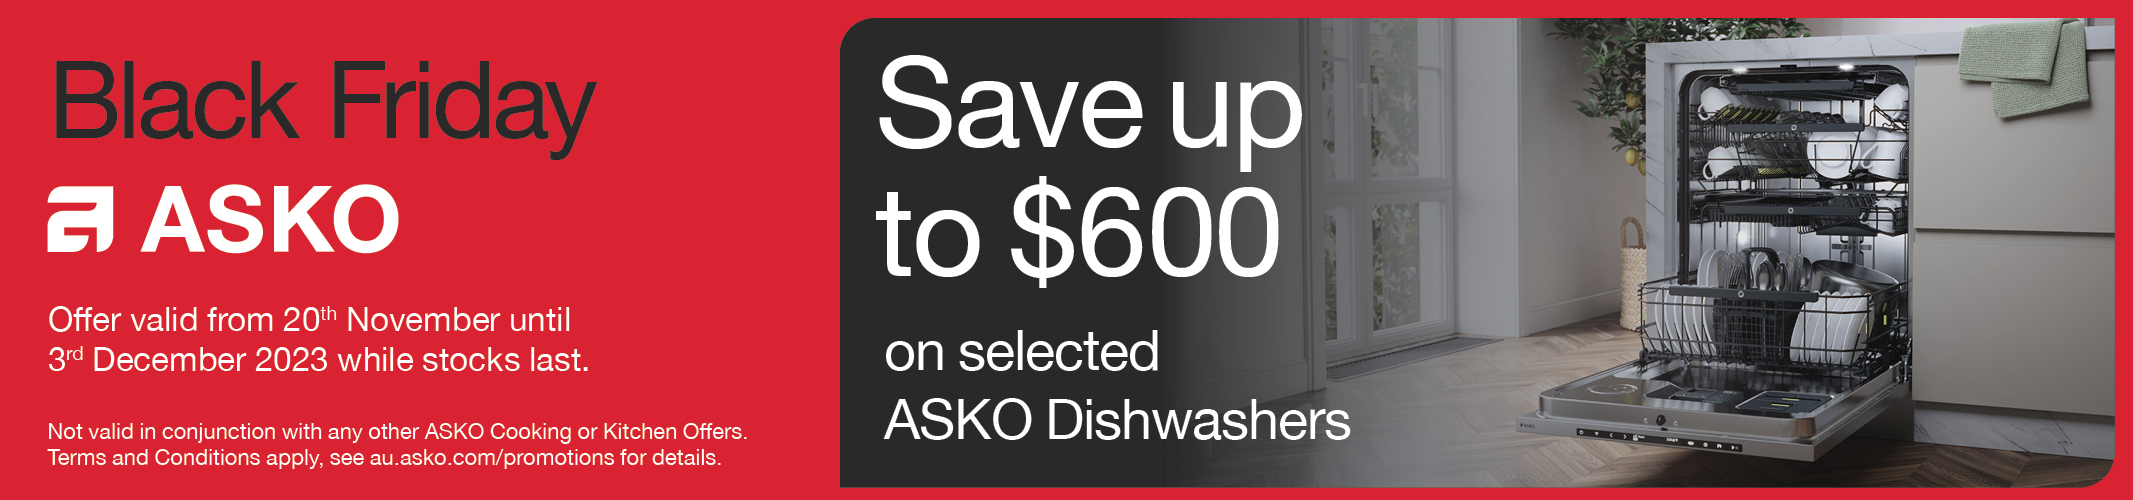 Save Up To $600 On Selected ASKO Dishwashers